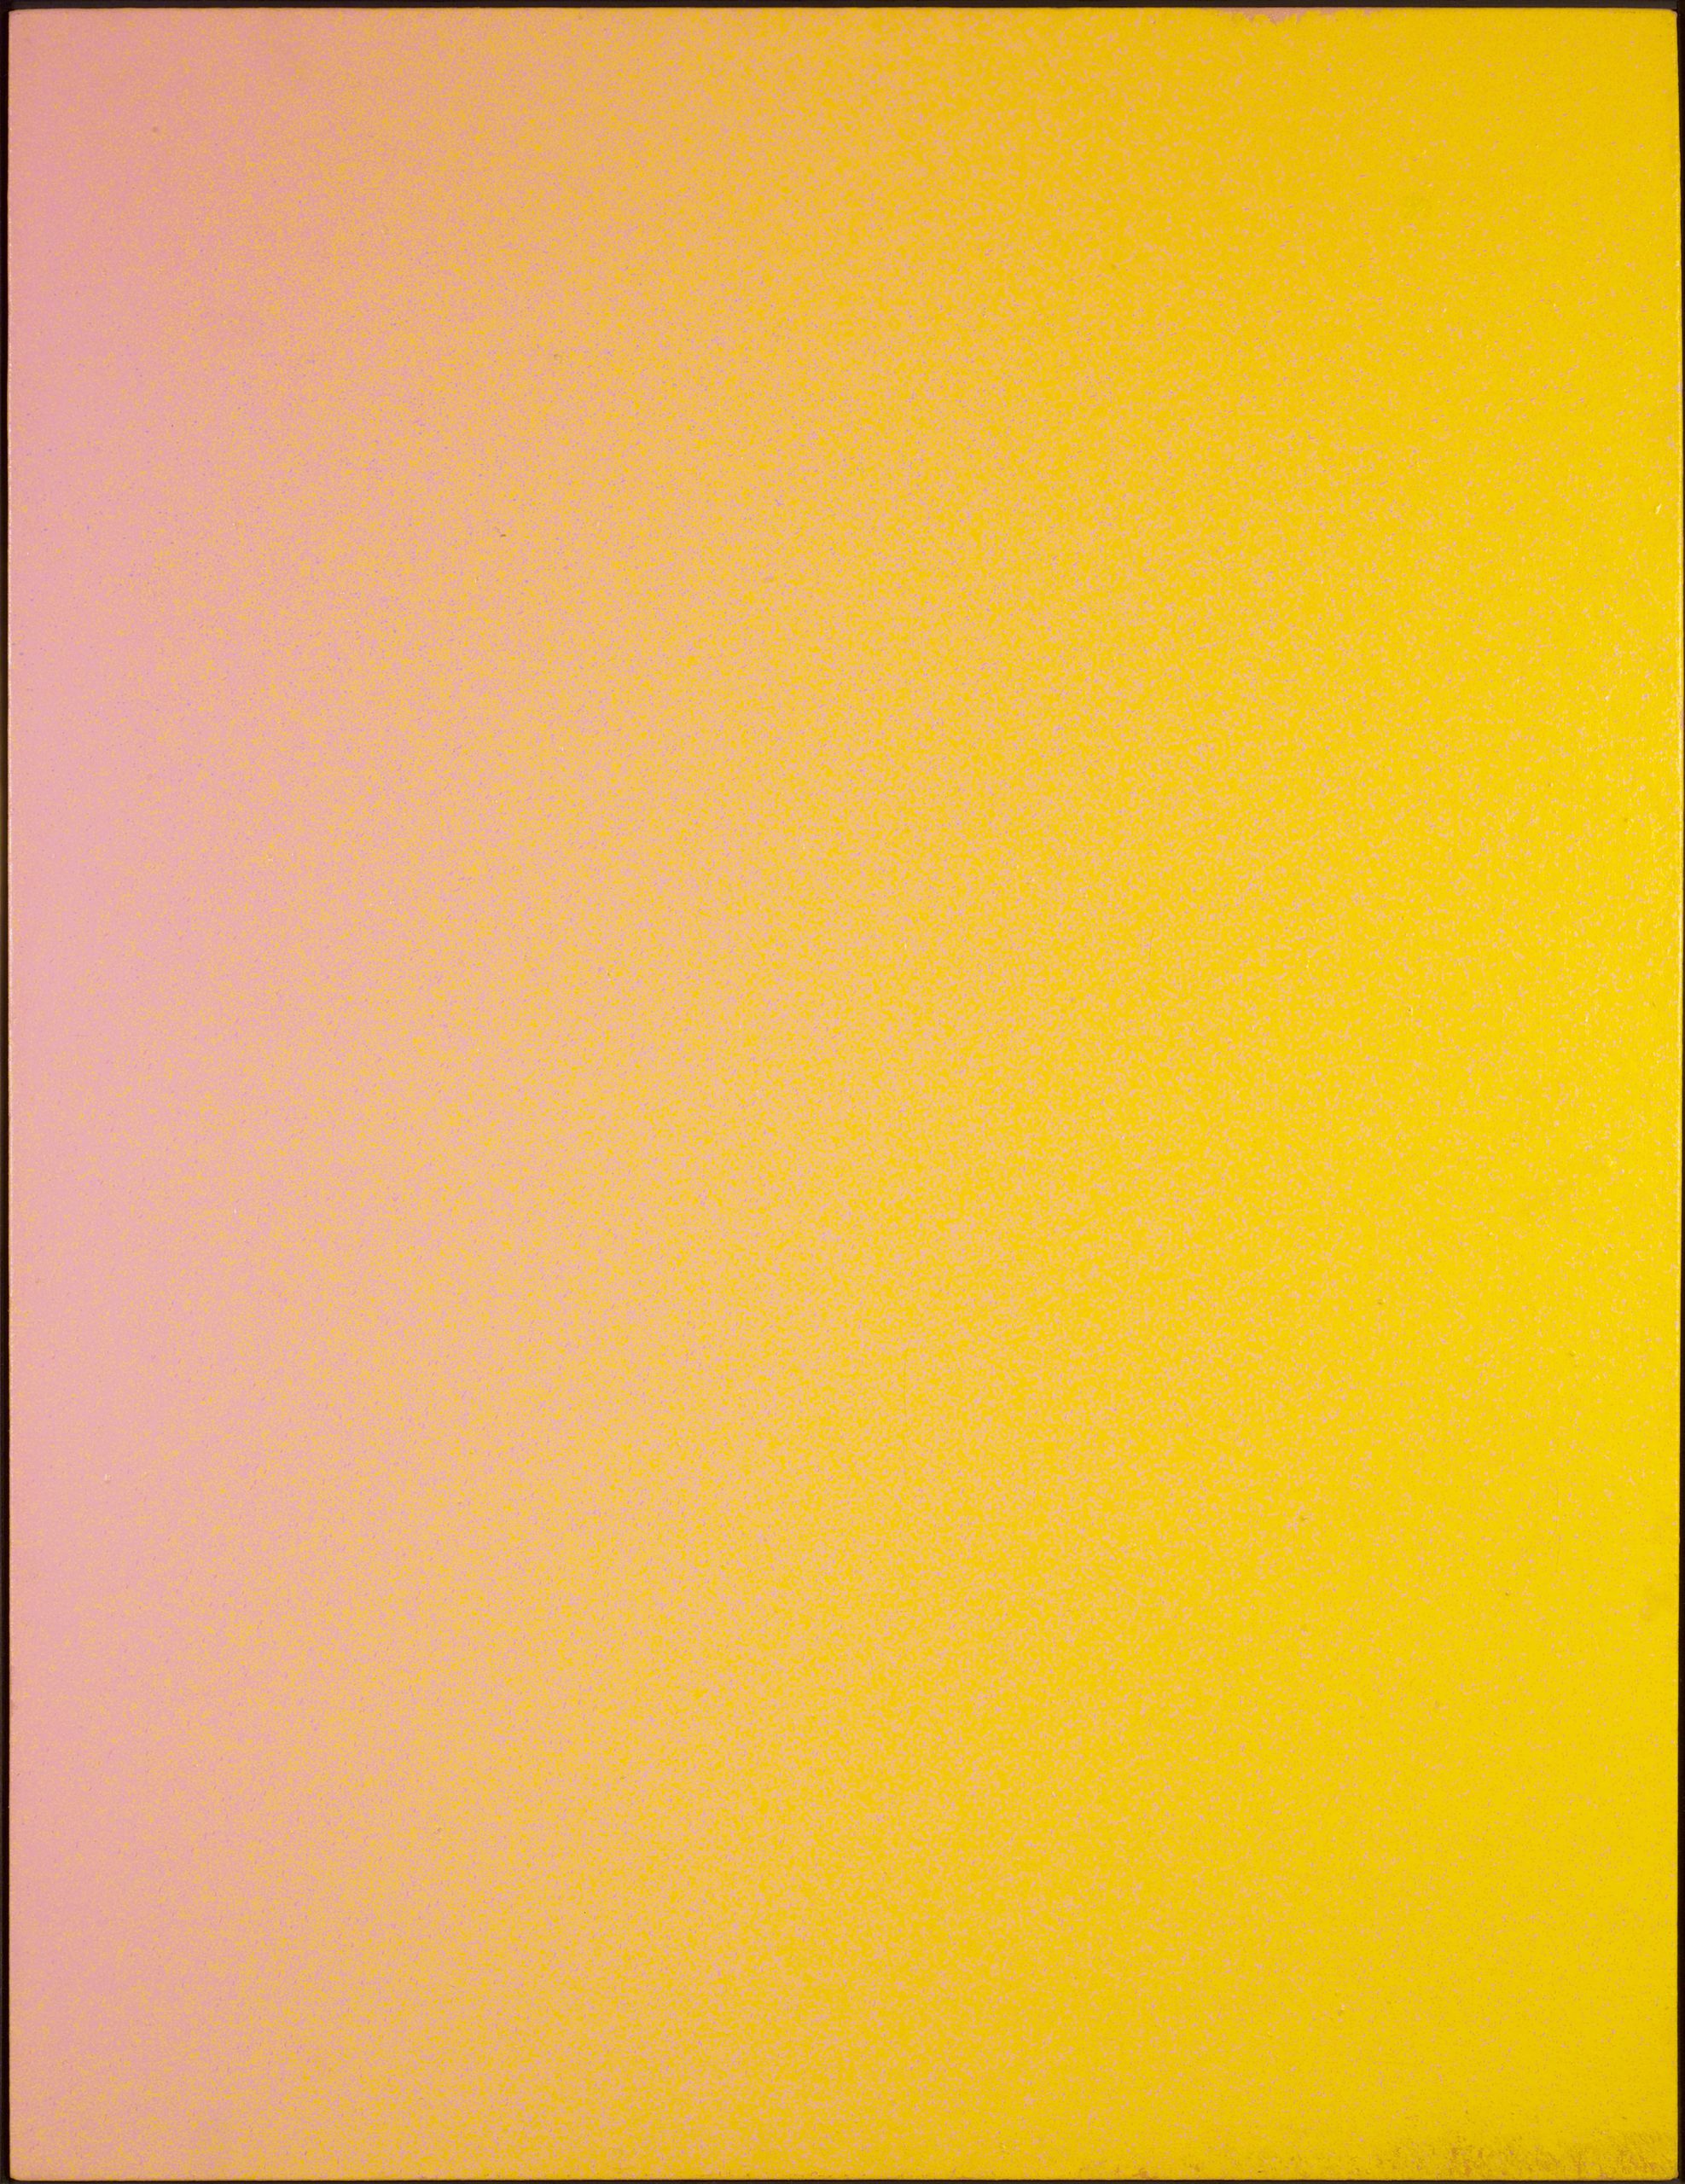 Color field painting that fades from pink to yellow.